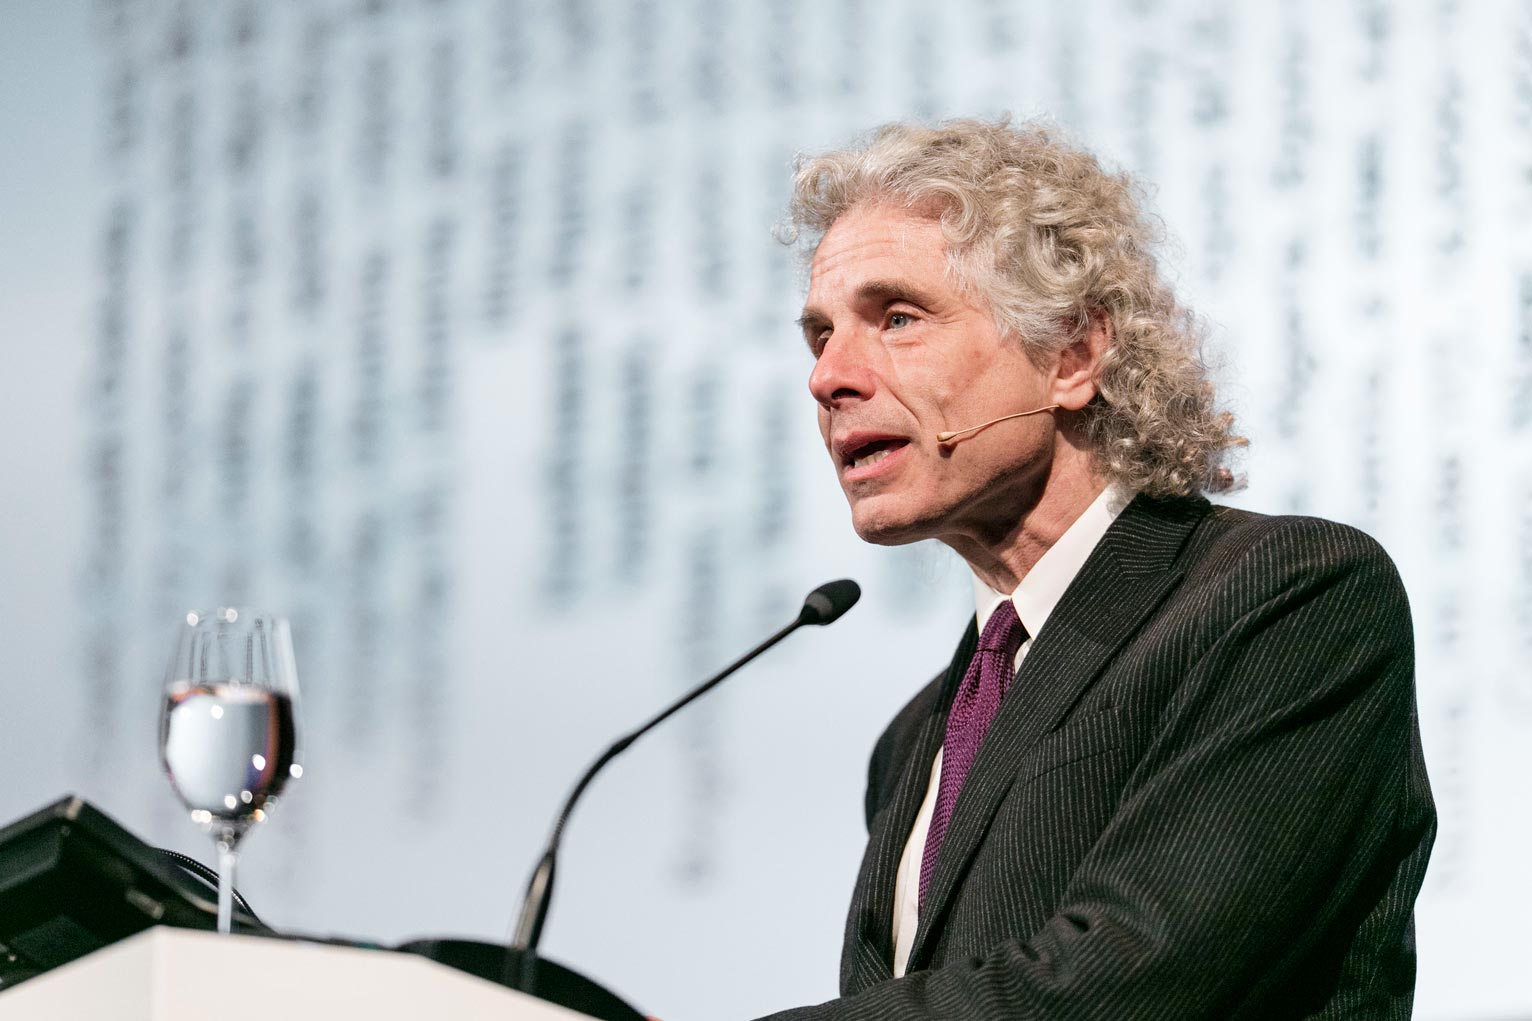 Steven Pinker shows that violence has been in decline over millennia